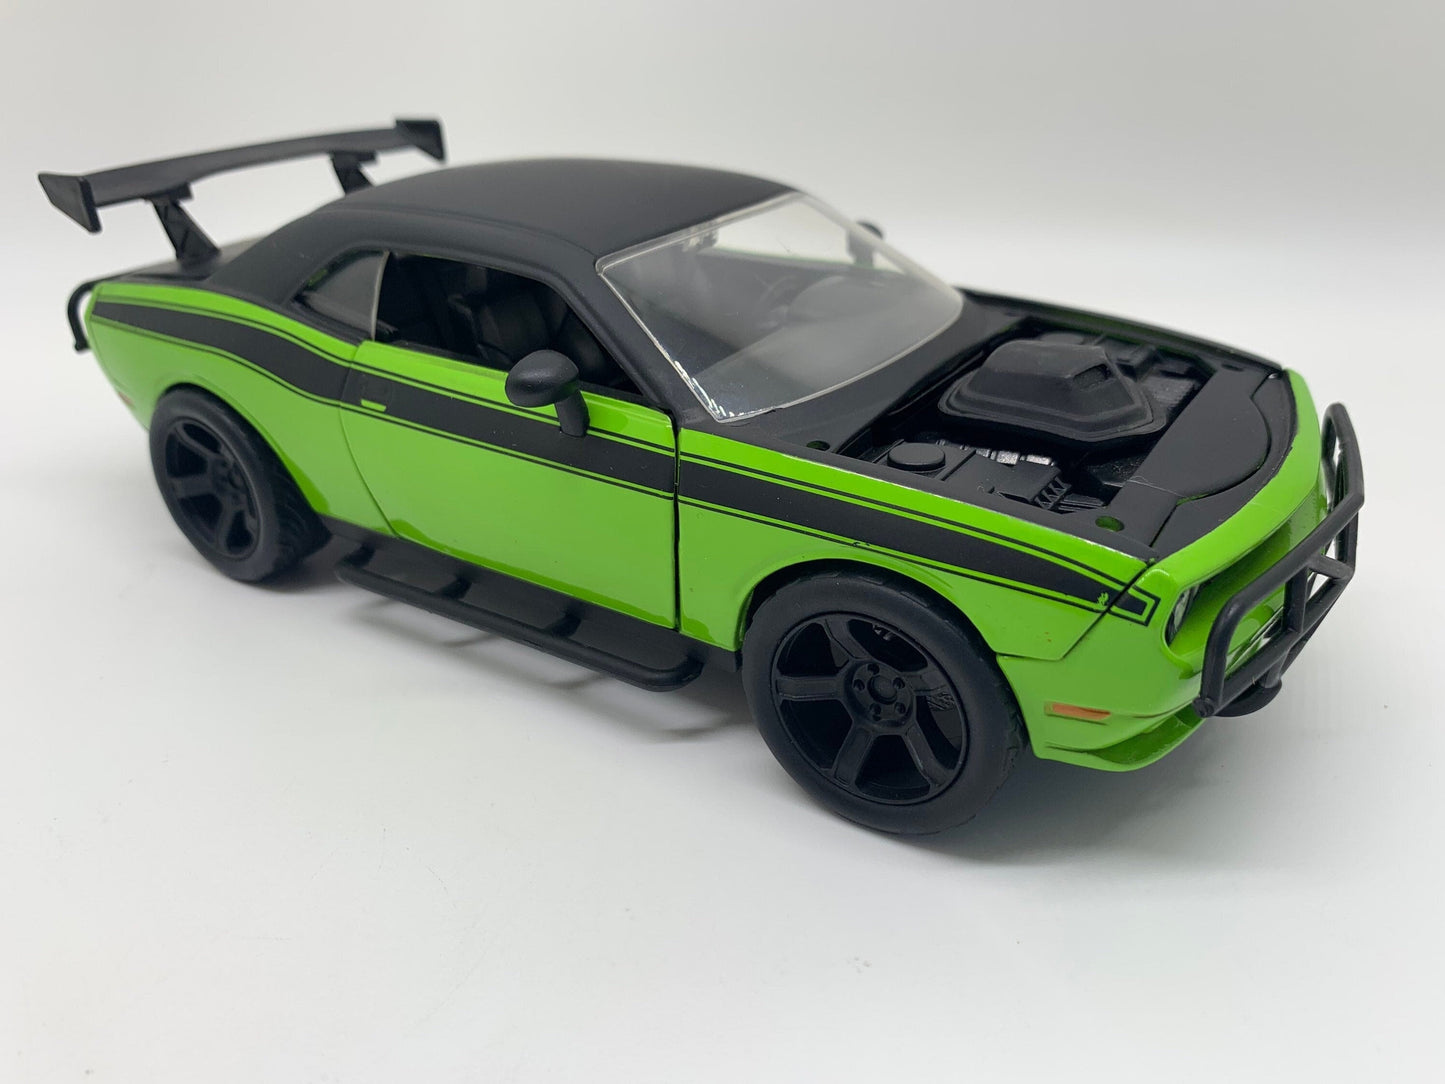 Jada Letty's Dodge Challenger SRT8 Green Fast and Furious Perfect Birthday Gift Collectable Scale Model Toy Car